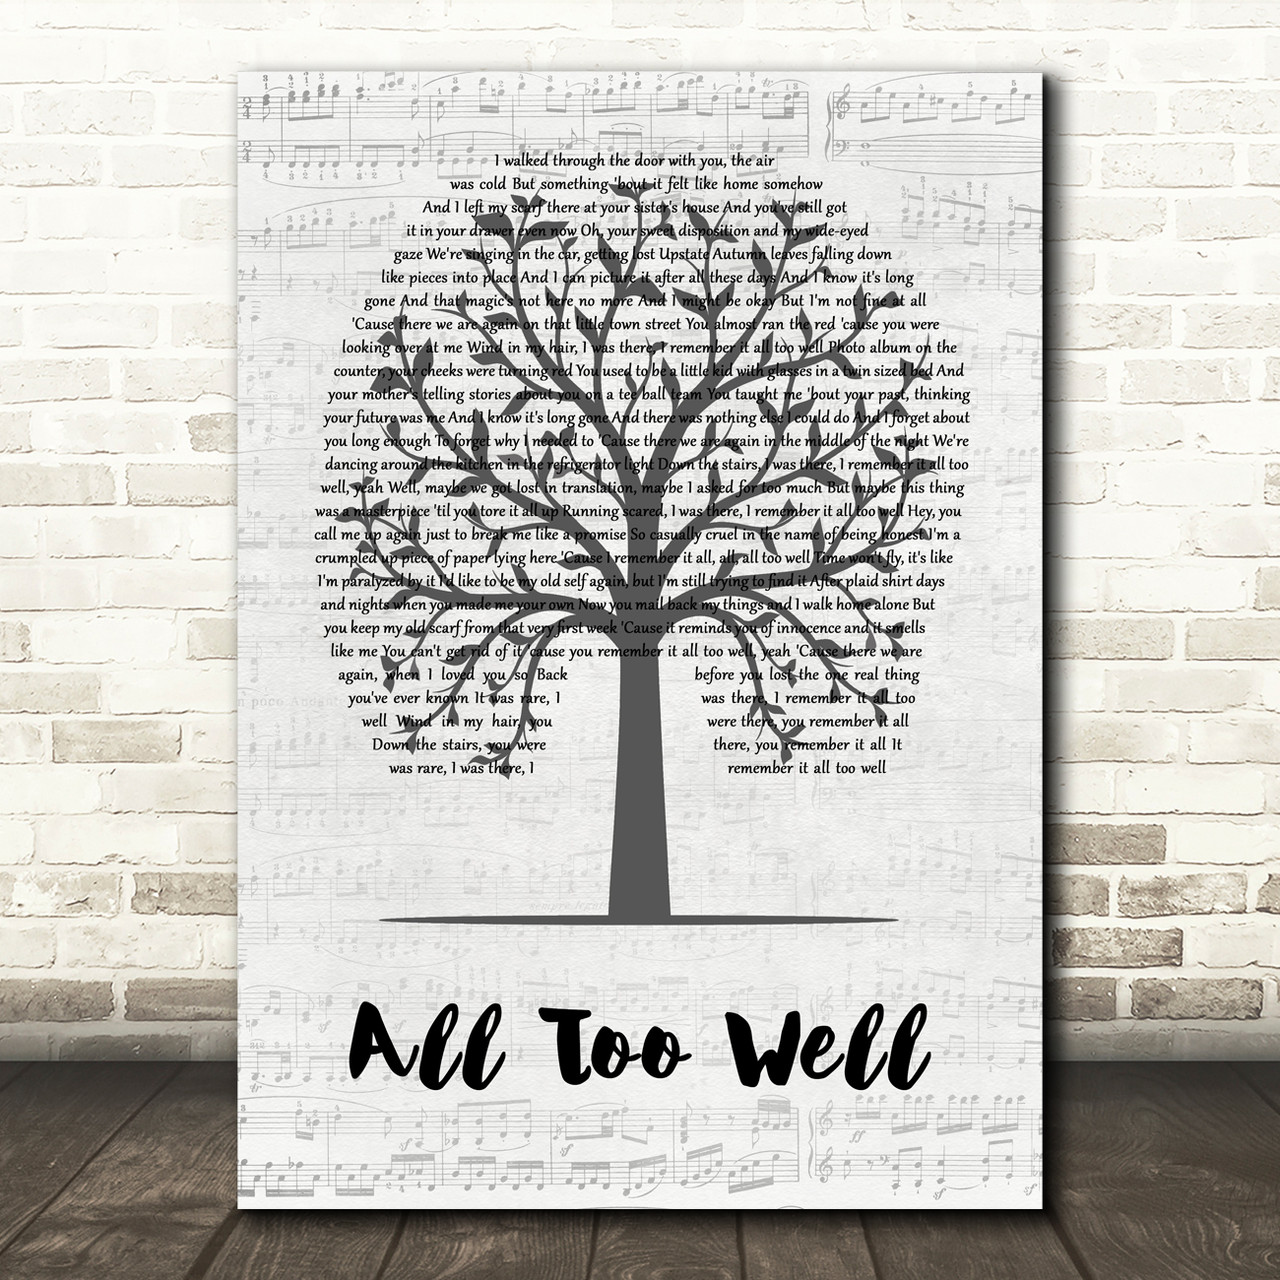 Tell Me Why - Taylor Swift Song Art Print for Sale by bombalurina